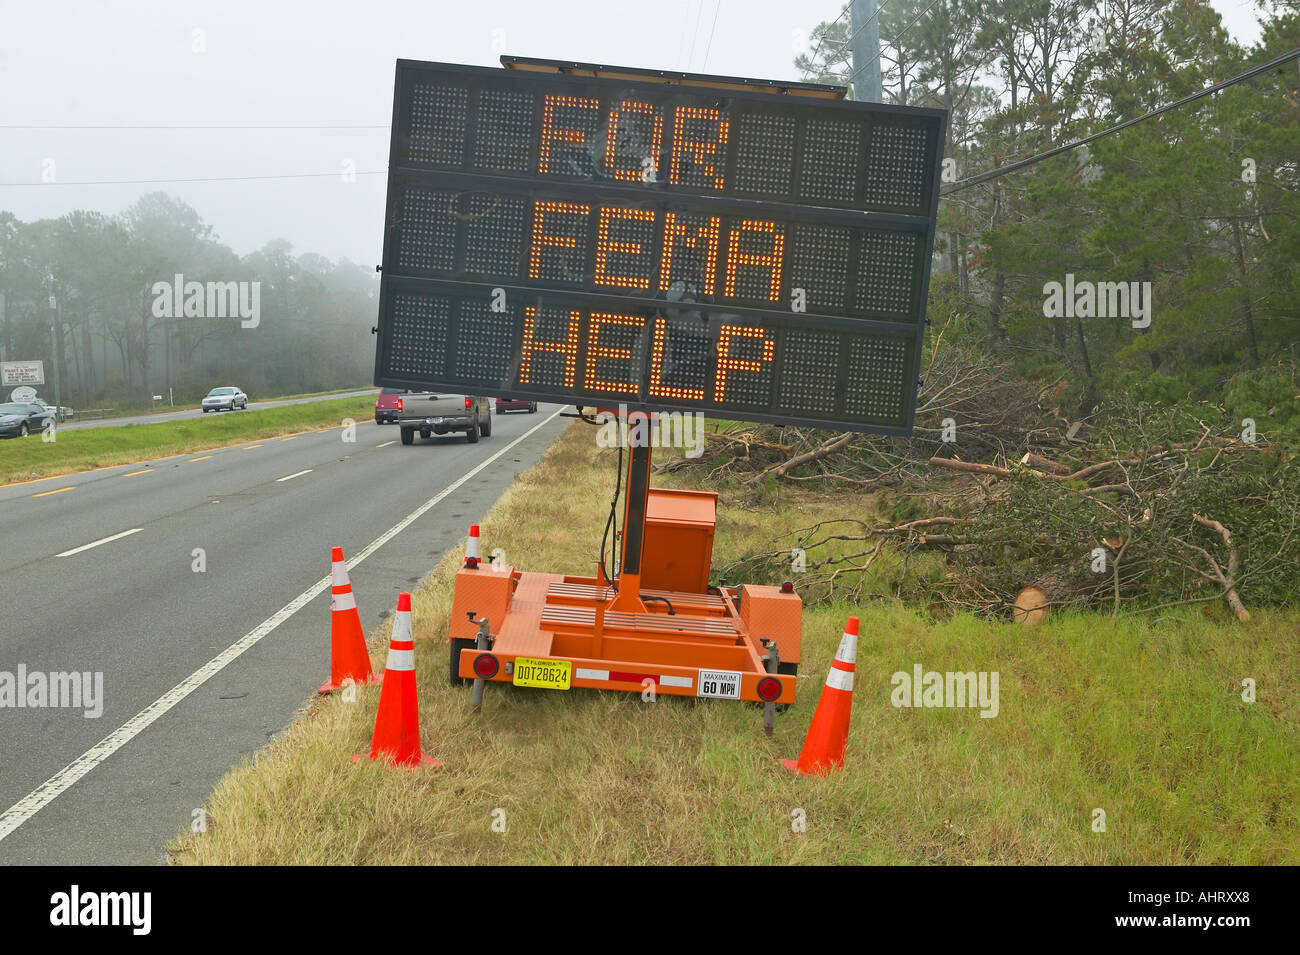 Hurricane Ivan Emergency road sign in Pensacola Florida advertising help from FEMA the Federal Emergency Management Agency Stock Photo